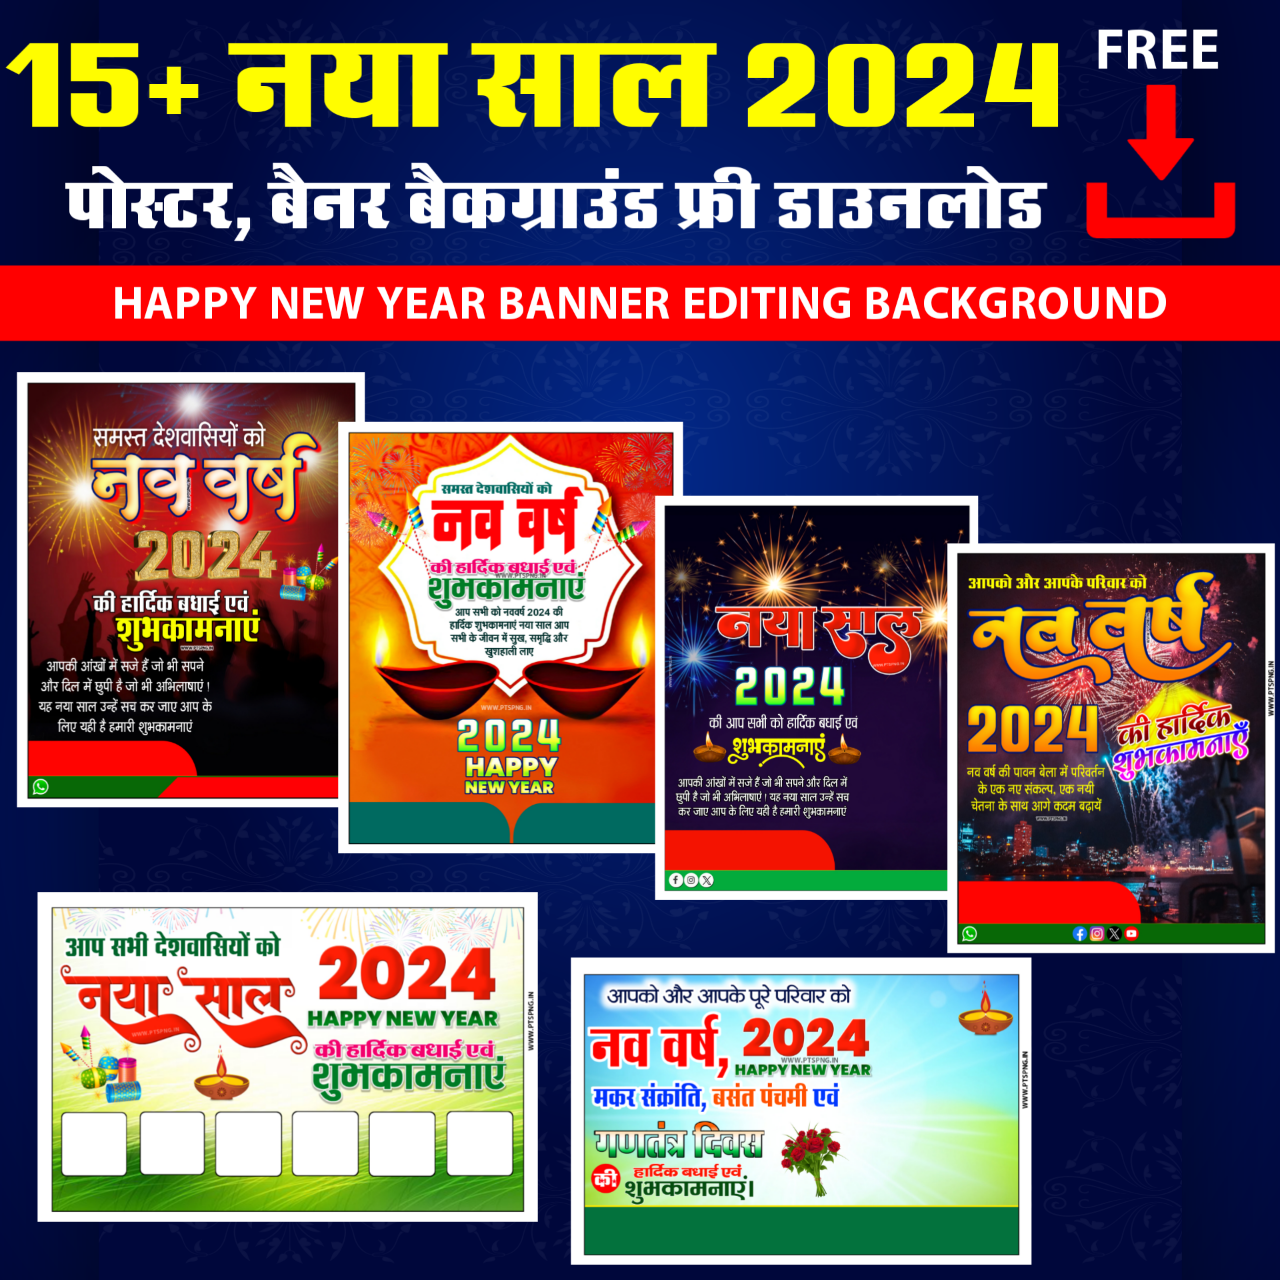 Happy New Year 2024 banner editing background images| naya Sal 2024 poster background images download| 2024 New Year poster background